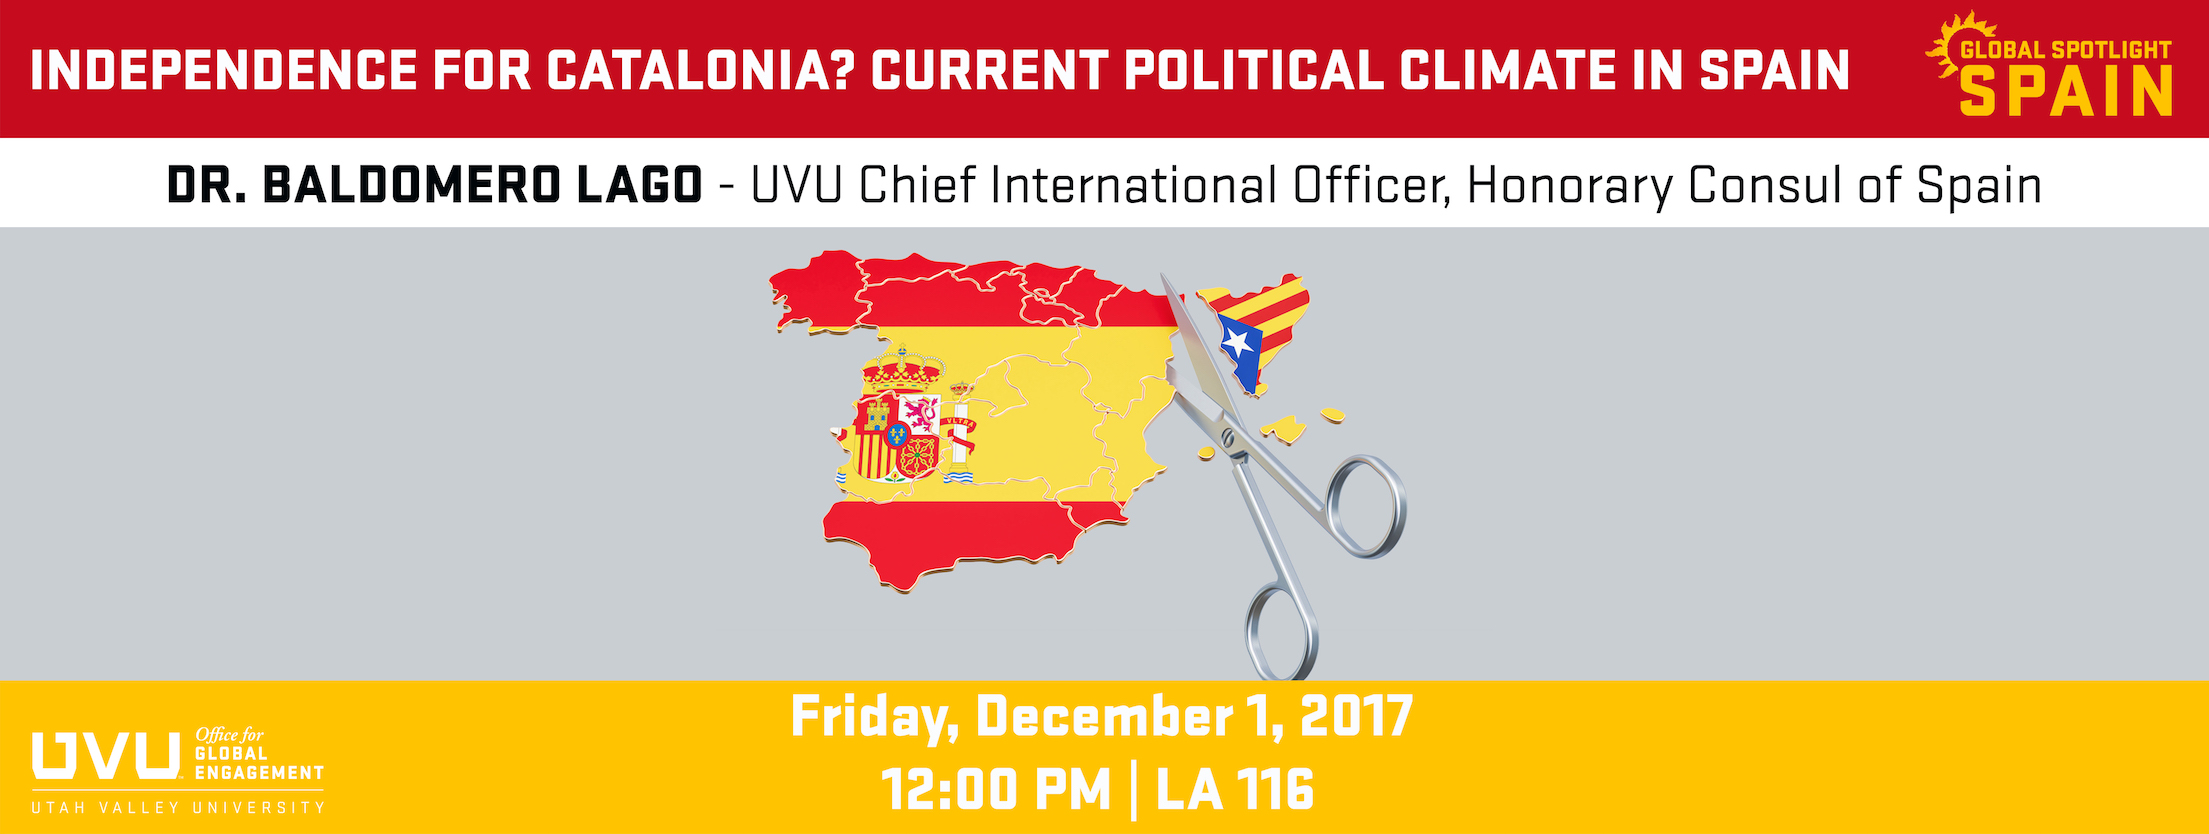 Banner for The Current Political Climate in Spain topic. Image of Spain with scissors cut off the Catalonia region. Text on image says: Independence for Catalonia? Current Political Climate in Spain. Dr. Baldomero Lago - UVU Chief International Officer, Honorary Consul of Spain. Friday, December 1, 2017. 12:00 PM | LA 116